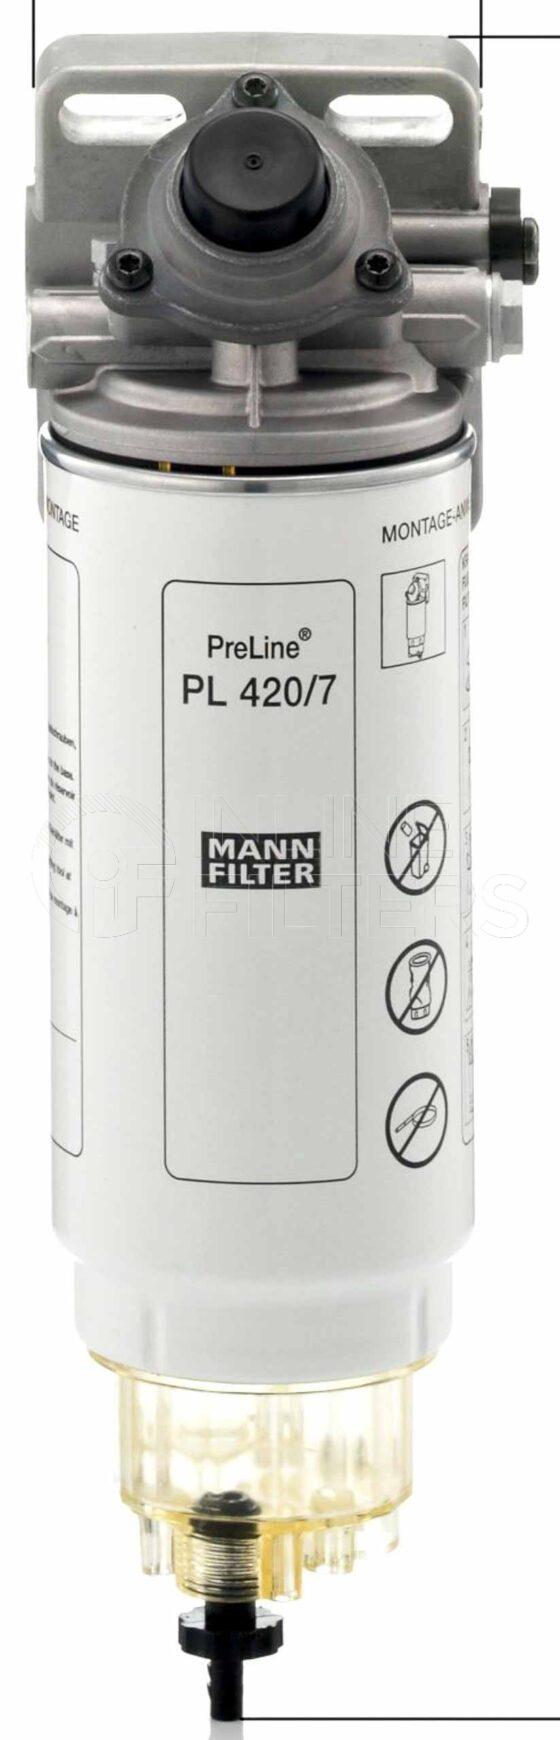 Mann 6660662257. FILTER-Fuel(Brand Specific) Product – Brand Specific Mann – Pre Line Product Service part for PreLine Series PreLine 420